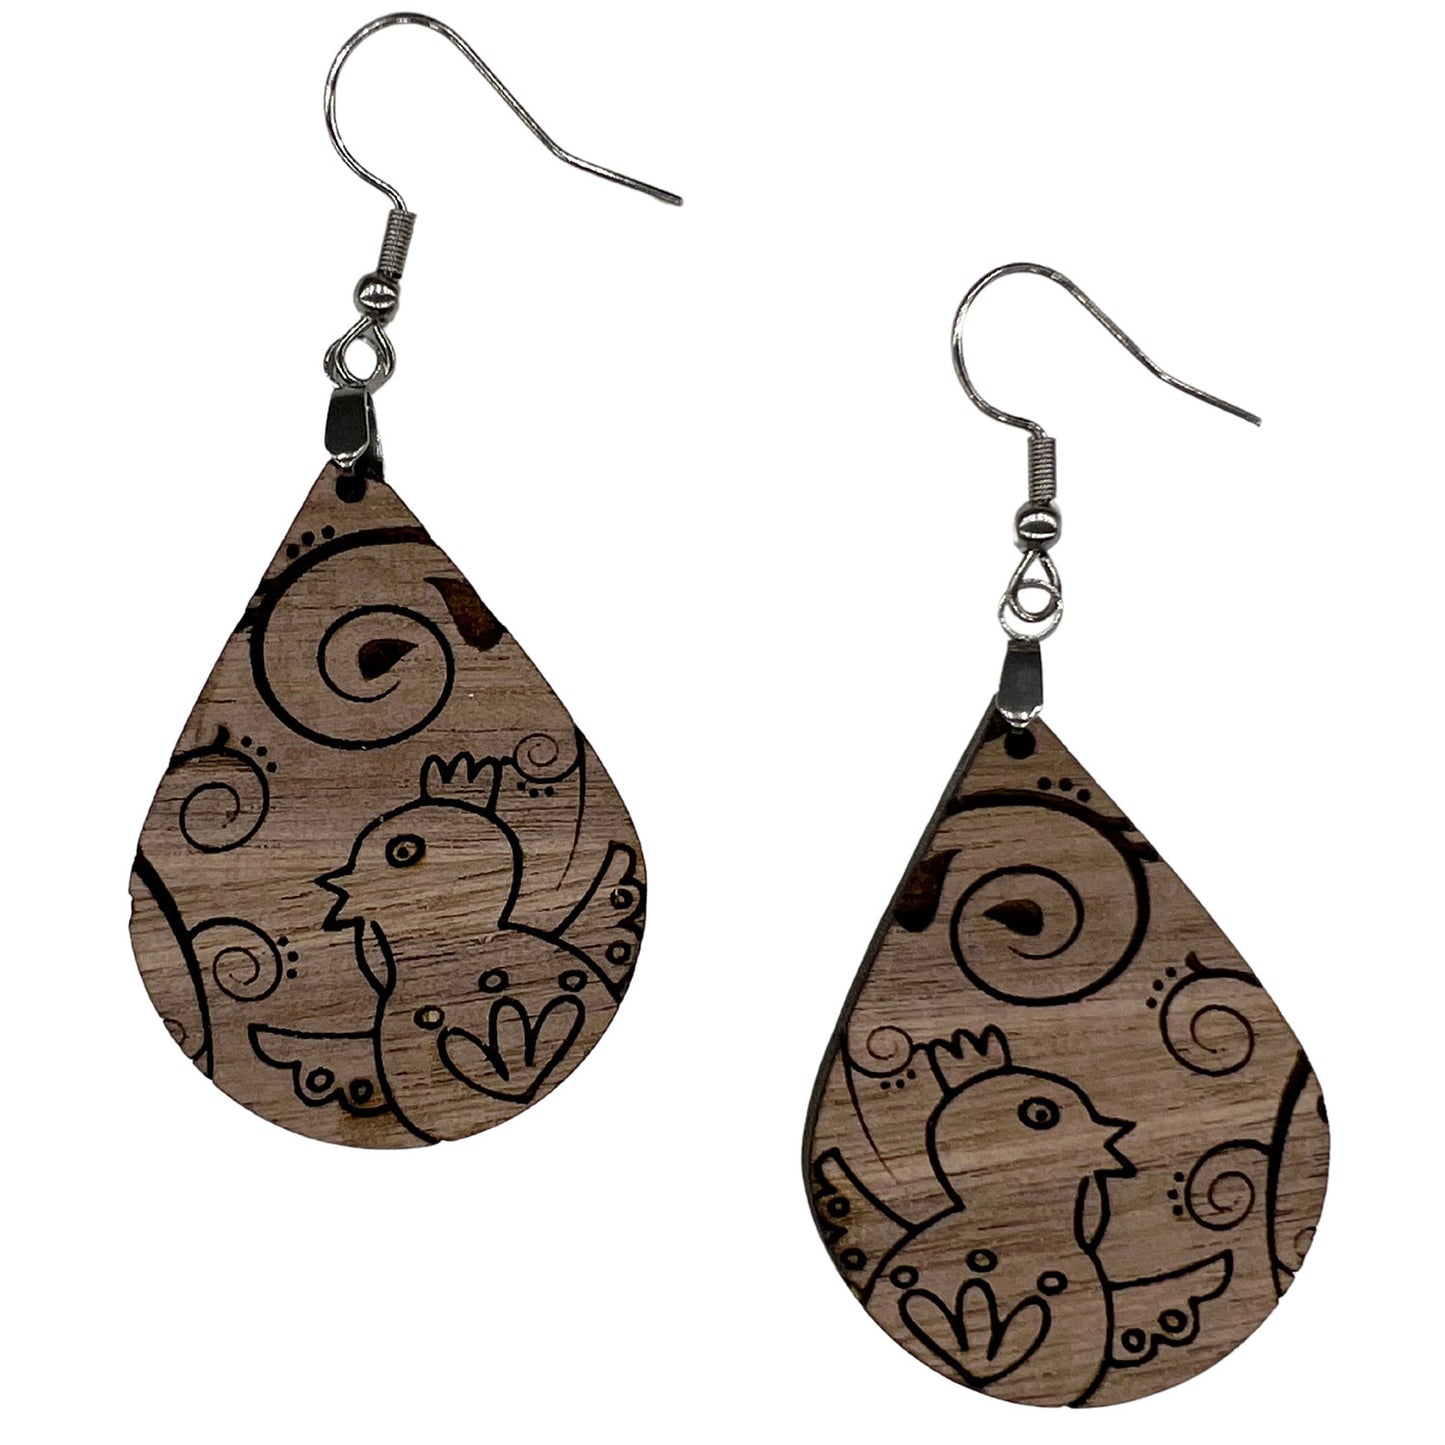 Paisley Chicken Quirky Dangle Earrings